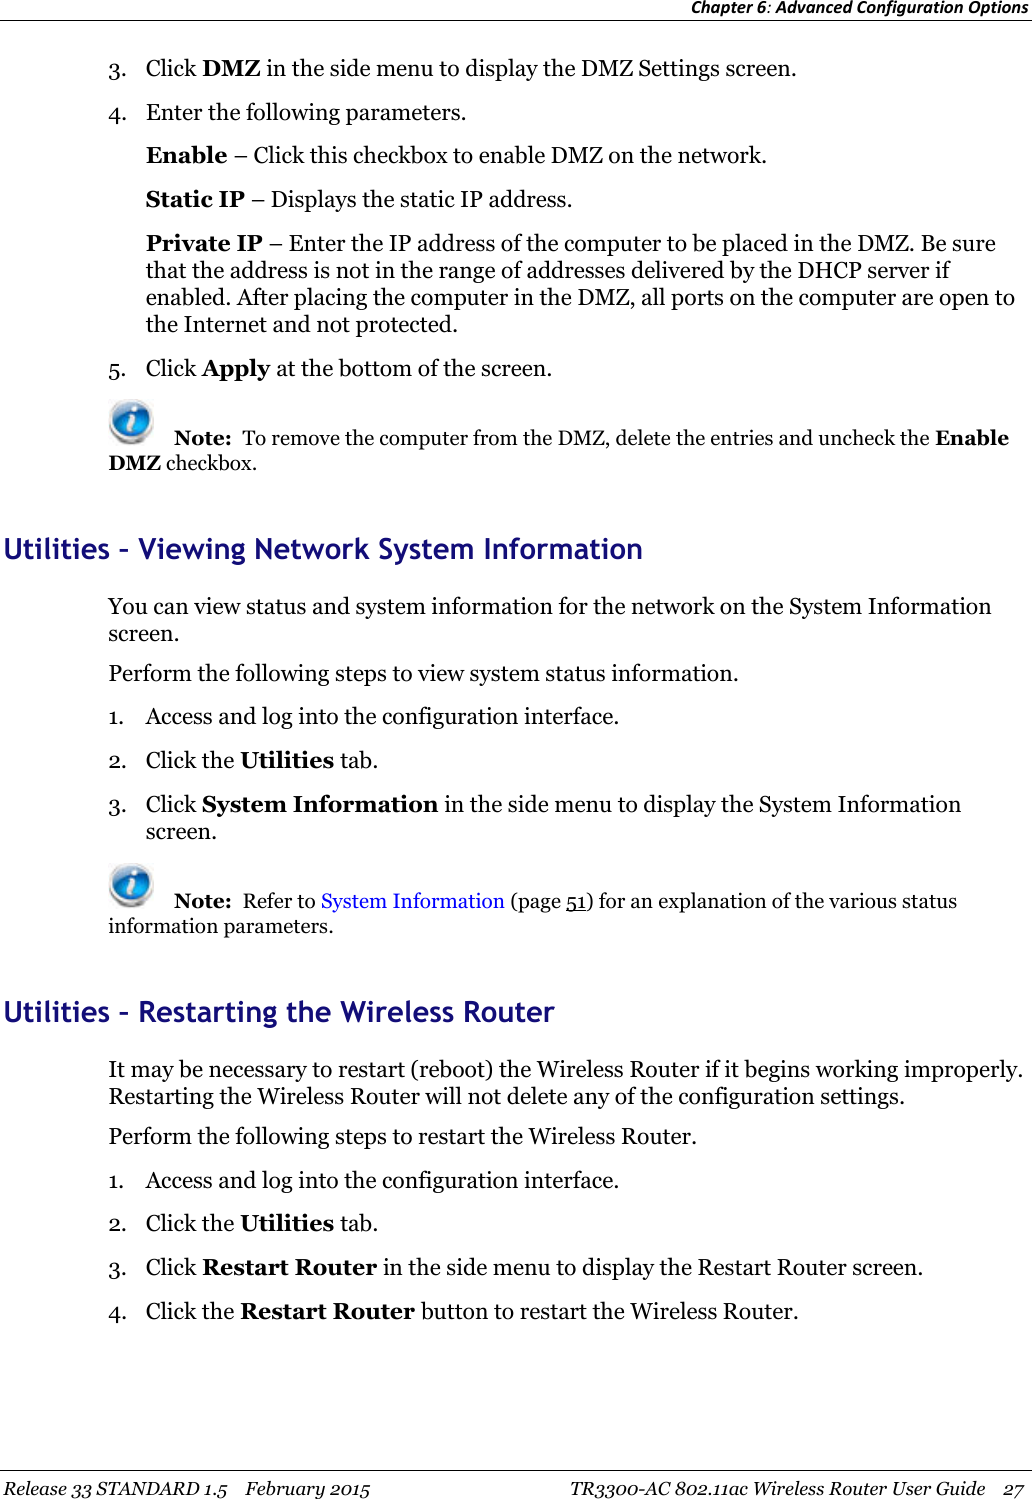 Chapter 6:Advanced Configuration OptionsRelease 33 STANDARD 1.5 February 2015 TR3300-AC 802.11ac Wireless Router User Guide 273. Click DMZ in the side menu to display the DMZ Settings screen.4. Enter the following parameters.Enable – Click this checkbox to enable DMZ on the network.Static IP – Displays the static IP address.Private IP – Enter the IP address of the computer to be placed in the DMZ. Be surethat the address is not in the range of addresses delivered by the DHCP server ifenabled. After placing the computer in the DMZ, all ports on the computer are open tothe Internet and not protected.5. Click Apply at the bottom of the screen.Note: To remove the computer from the DMZ, delete the entries and uncheck the EnableDMZ checkbox.Utilities – Viewing Network System InformationYou can view status and system information for the network on the System Informationscreen.Perform the following steps to view system status information.1. Access and log into the configuration interface.2. Click the Utilities tab.3. Click System Information in the side menu to display the System Informationscreen.Note: Refer to System Information (page 51) for an explanation of the various statusinformation parameters.Utilities – Restarting the Wireless RouterIt may be necessary to restart (reboot) the Wireless Router if it begins working improperly.Restarting the Wireless Router will not delete any of the configuration settings.Perform the following steps to restart the Wireless Router.1. Access and log into the configuration interface.2. Click the Utilities tab.3. Click Restart Router in the side menu to display the Restart Router screen.4. Click the Restart Router button to restart the Wireless Router.